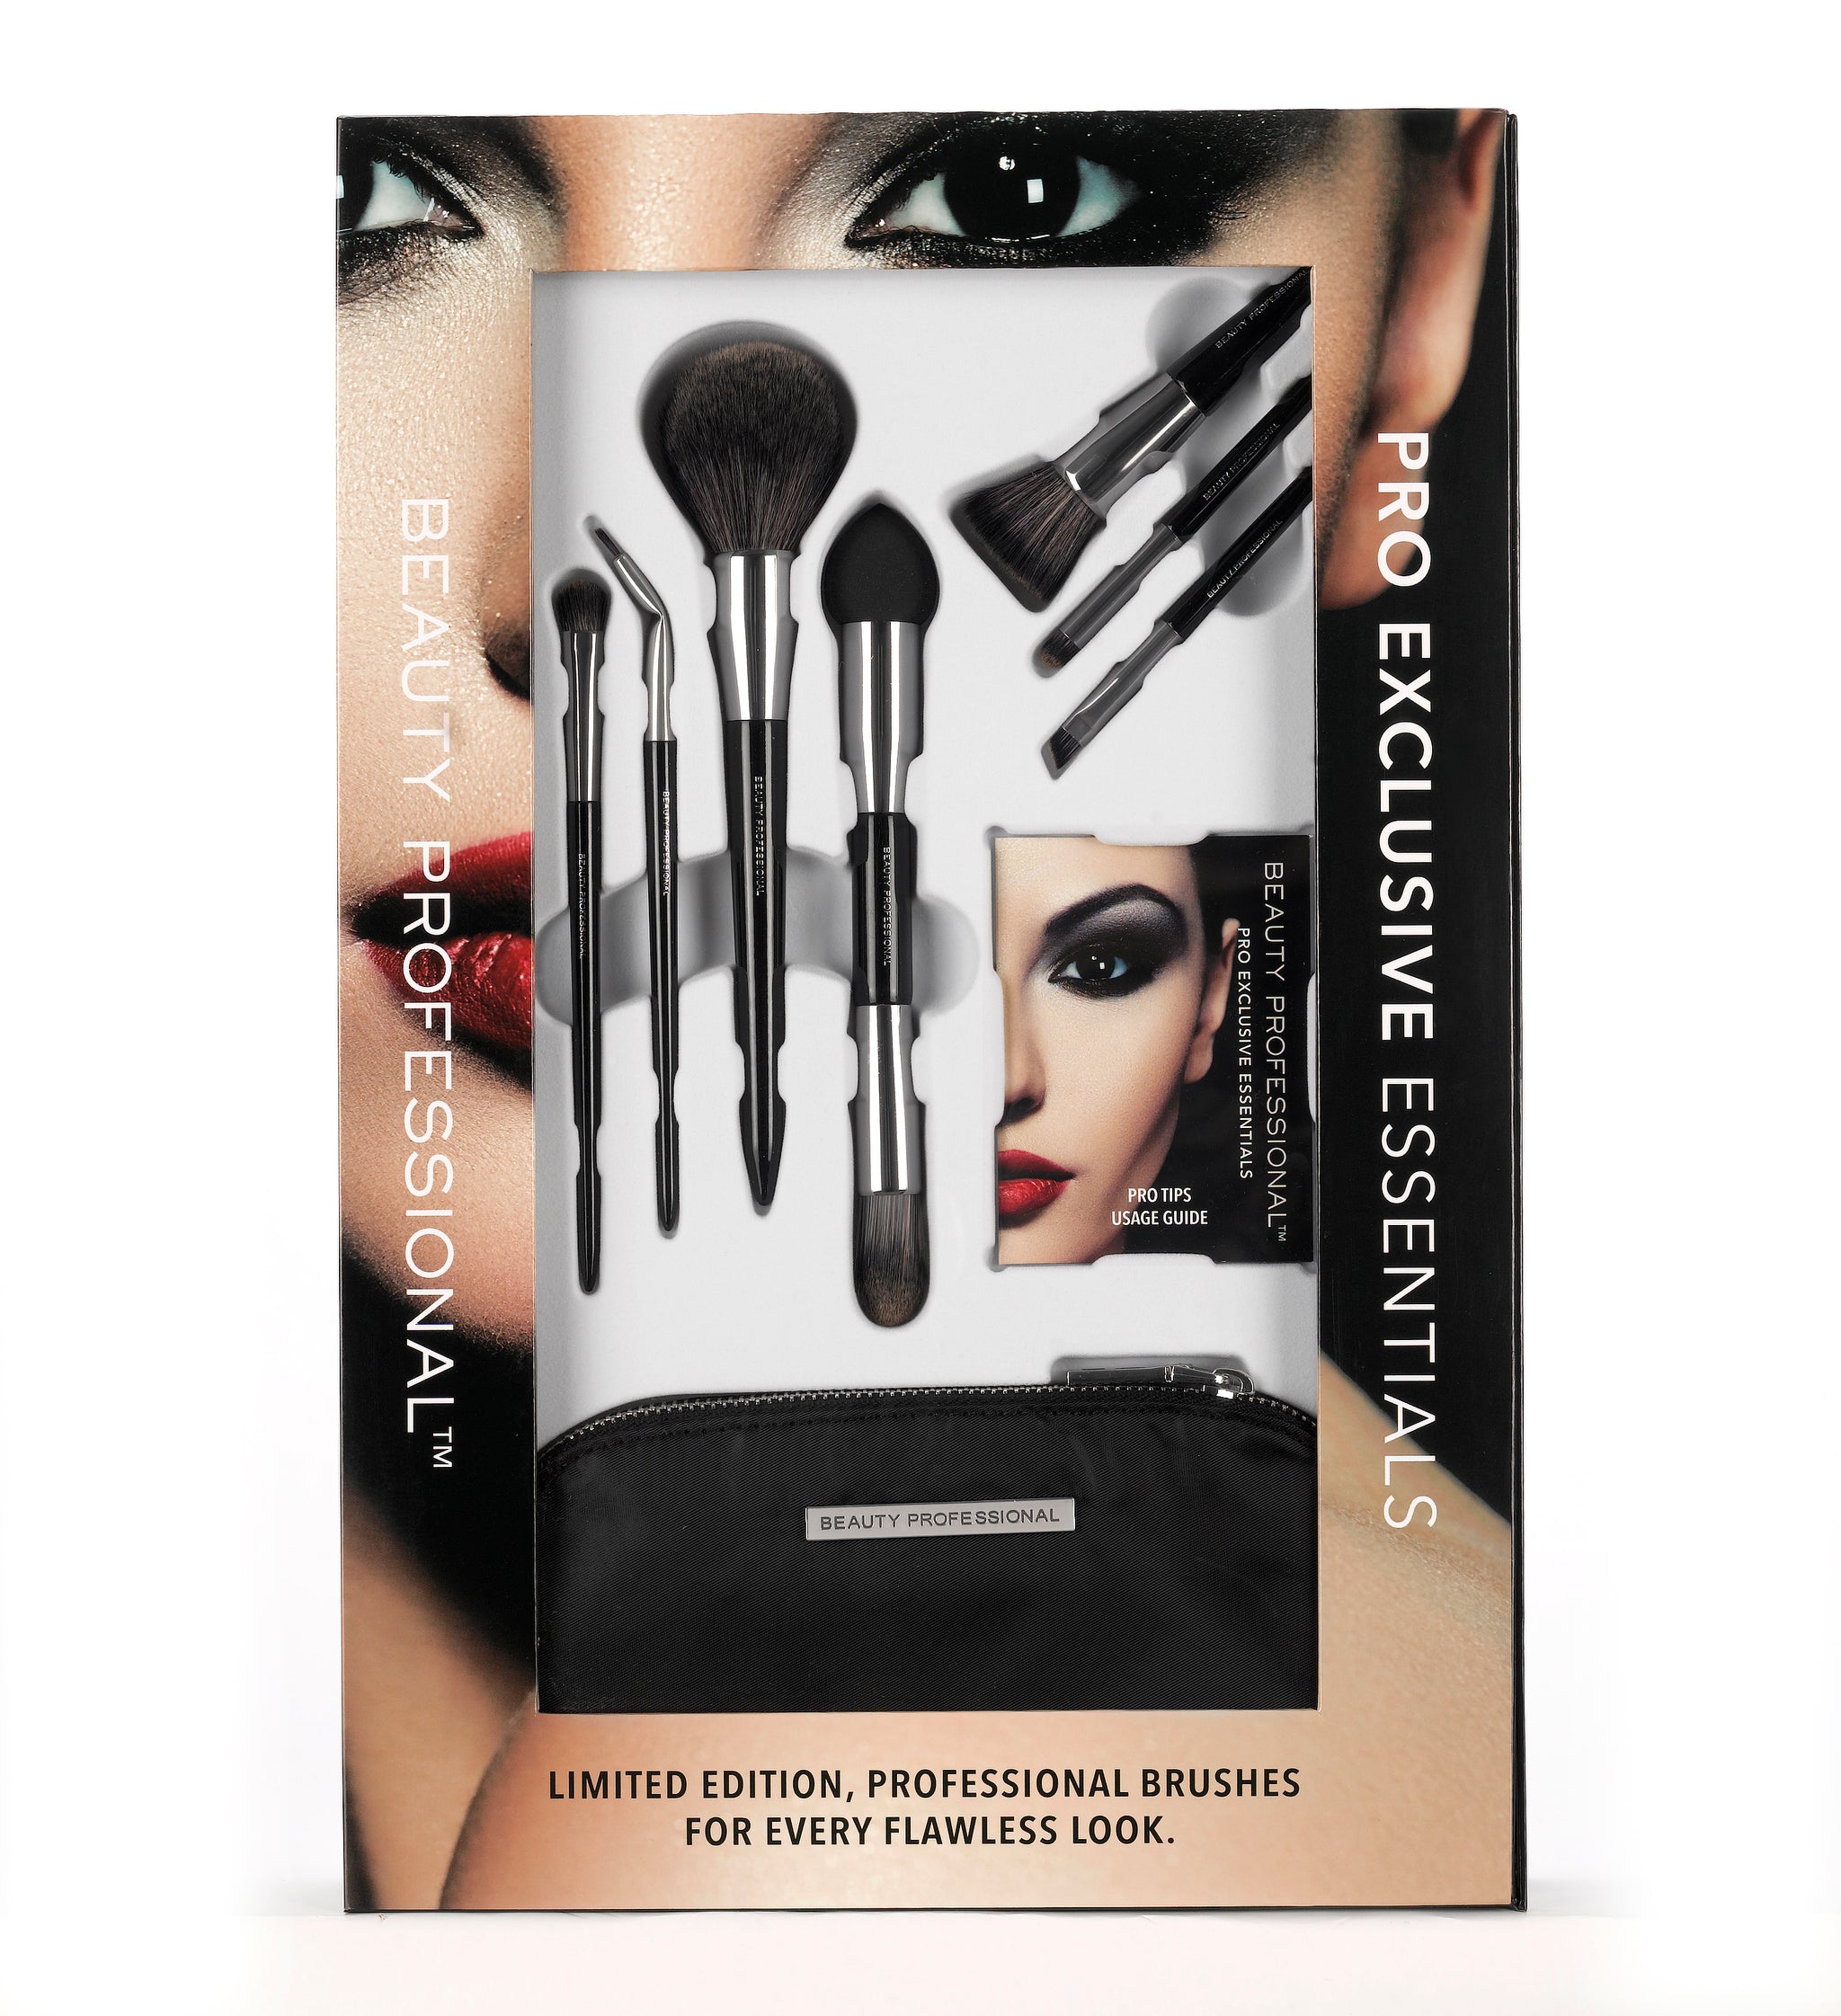 NEW PRO ESSENTIALS: A SET AND beautyprofessional | BRUSH TRAVEL-SIZED FULL